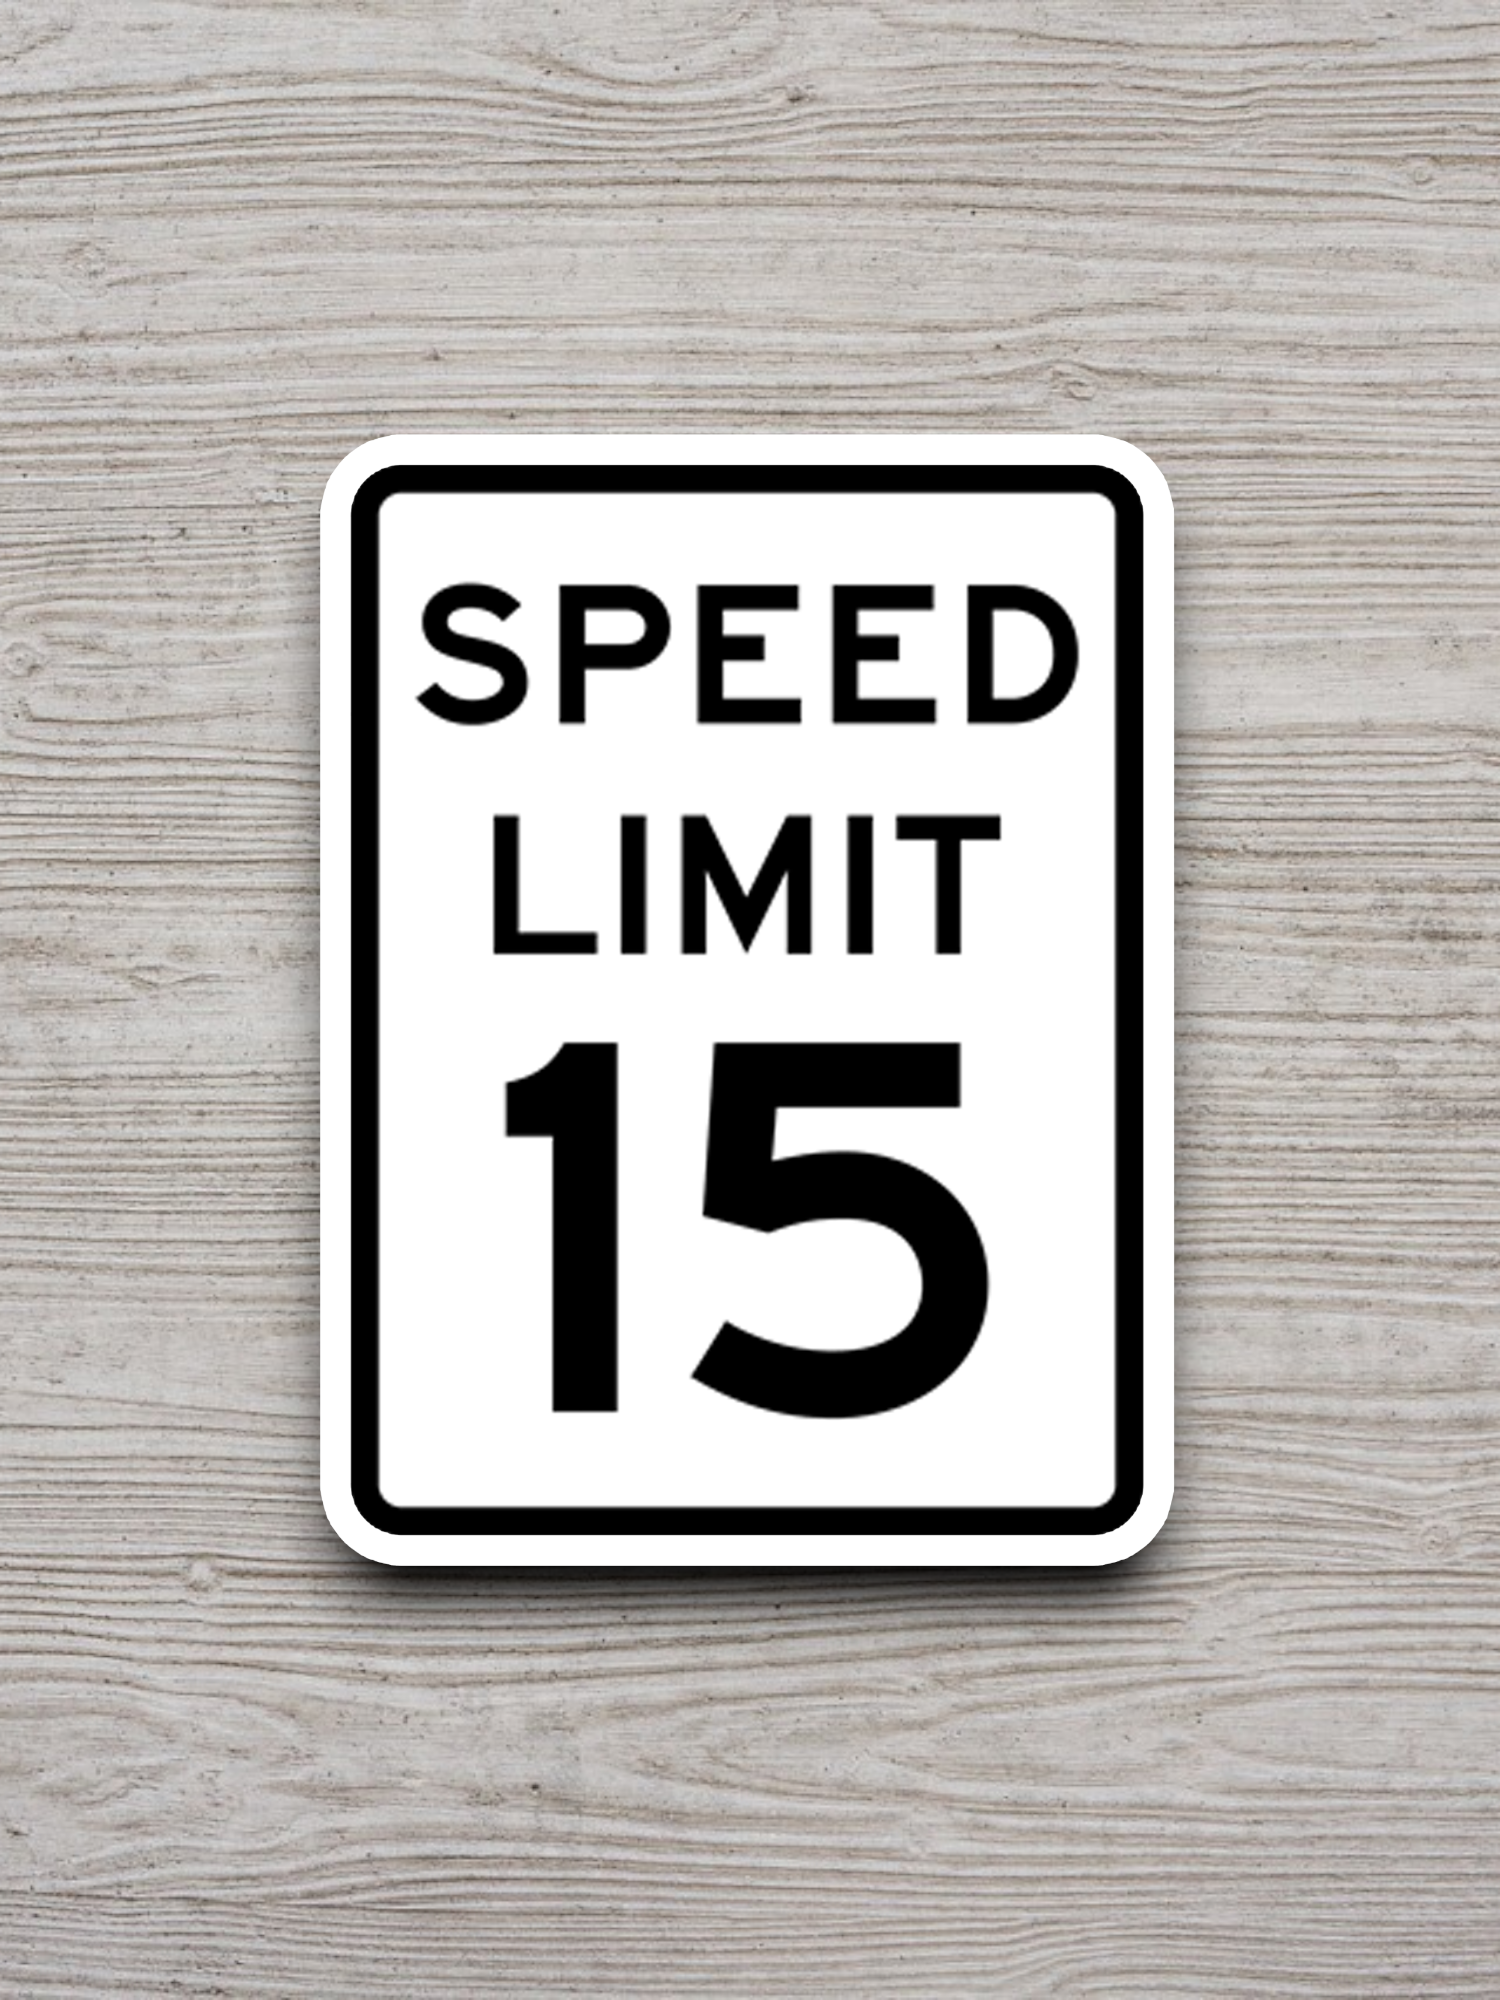 15 Miles Per Hour Speed Limit Road Sign Sticker